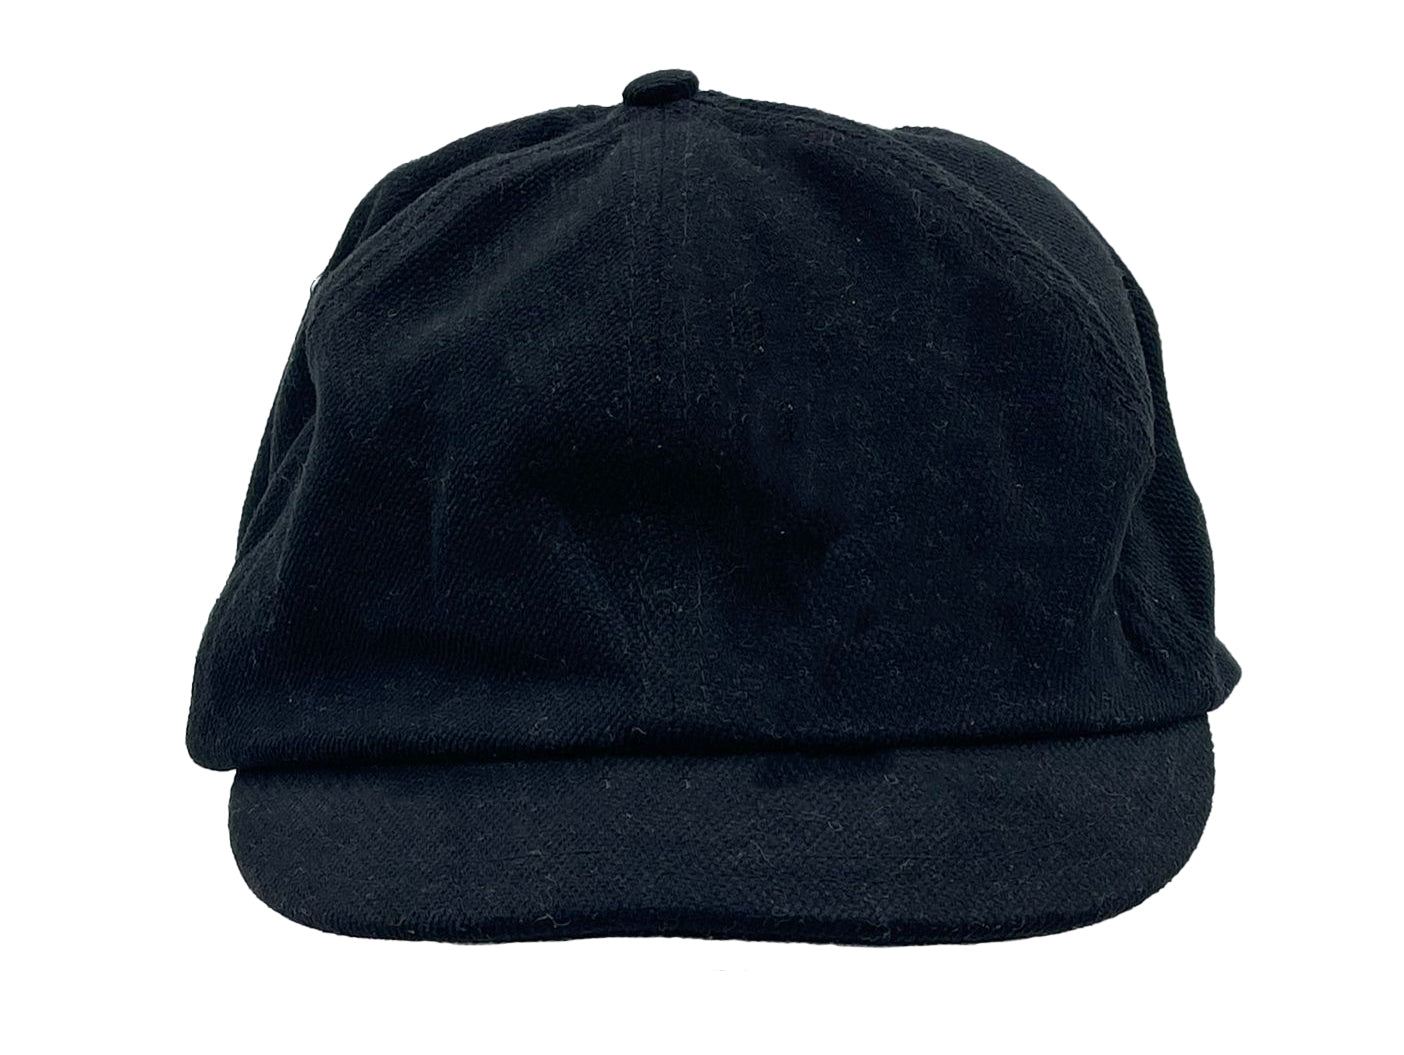 Ultra -light slide hat with elastic band | Men's Cappi made of soft twill